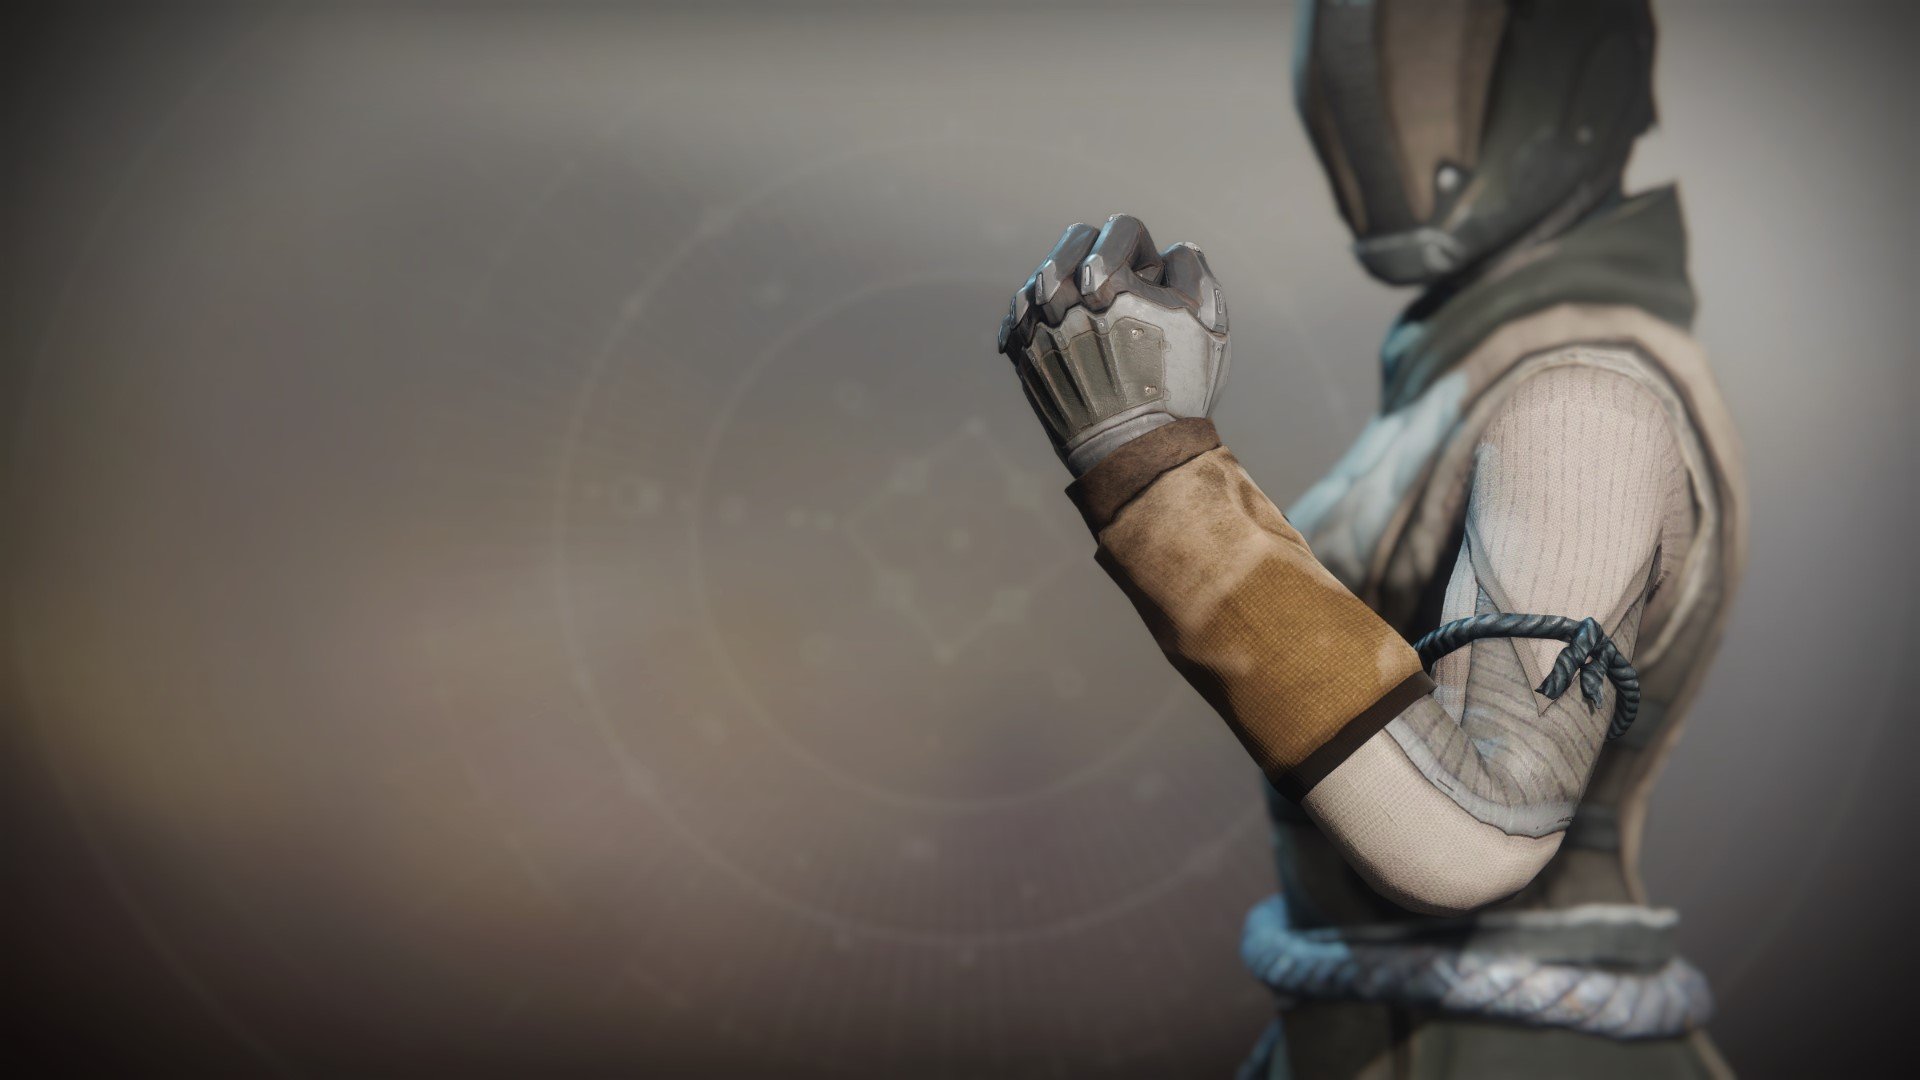 An in-game render of the Ancient Apocalypse Gloves.